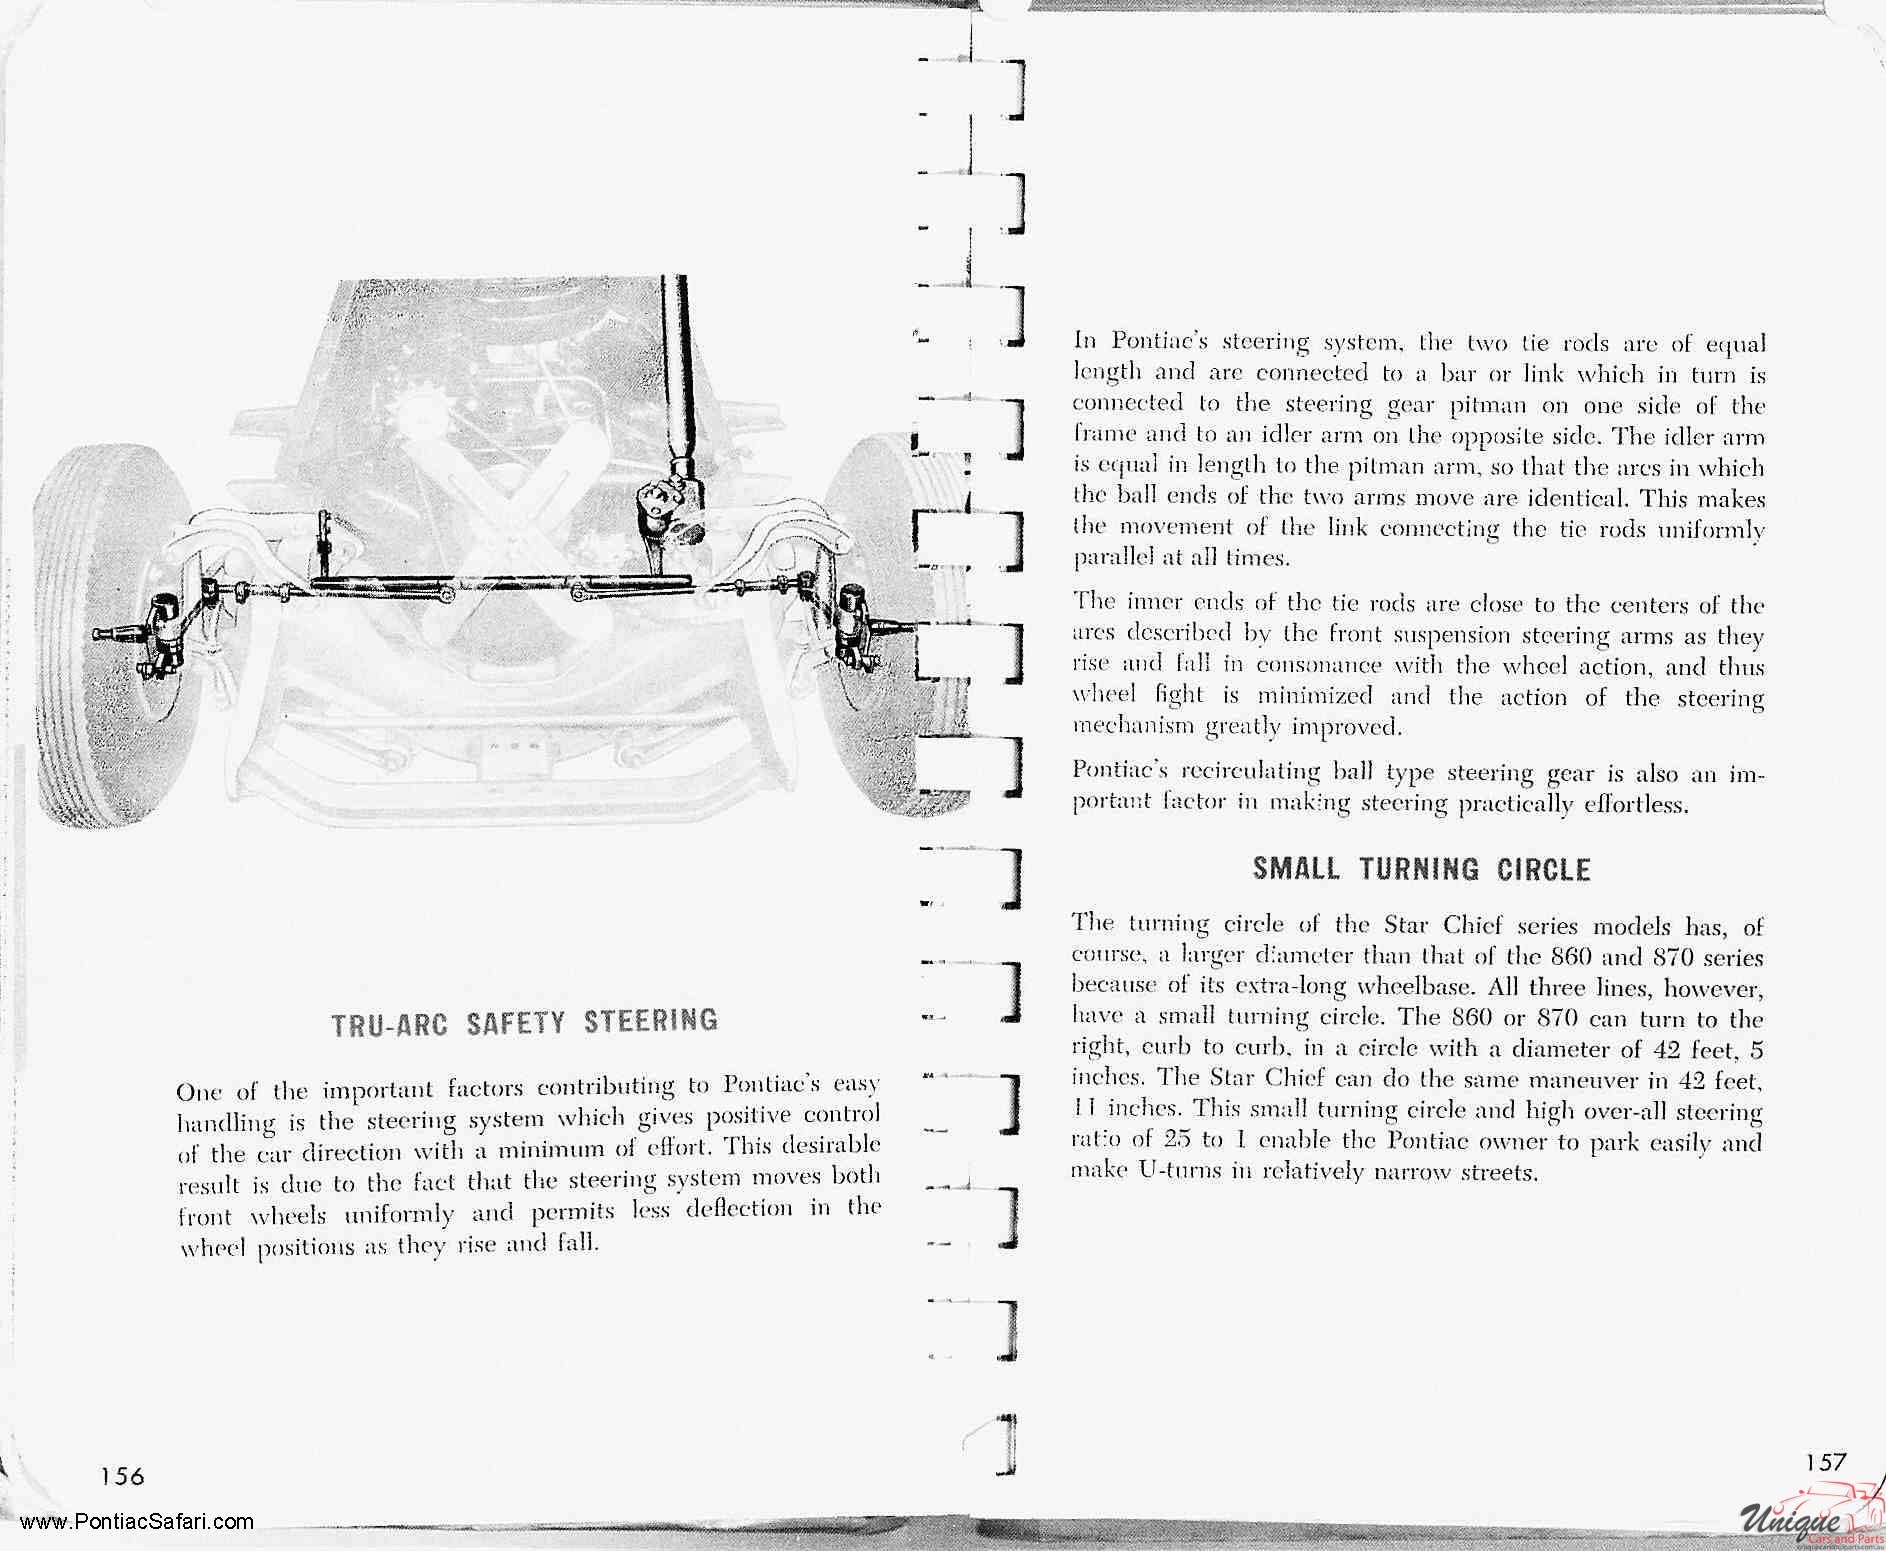 1956 Pontiac Facts Book Page 126